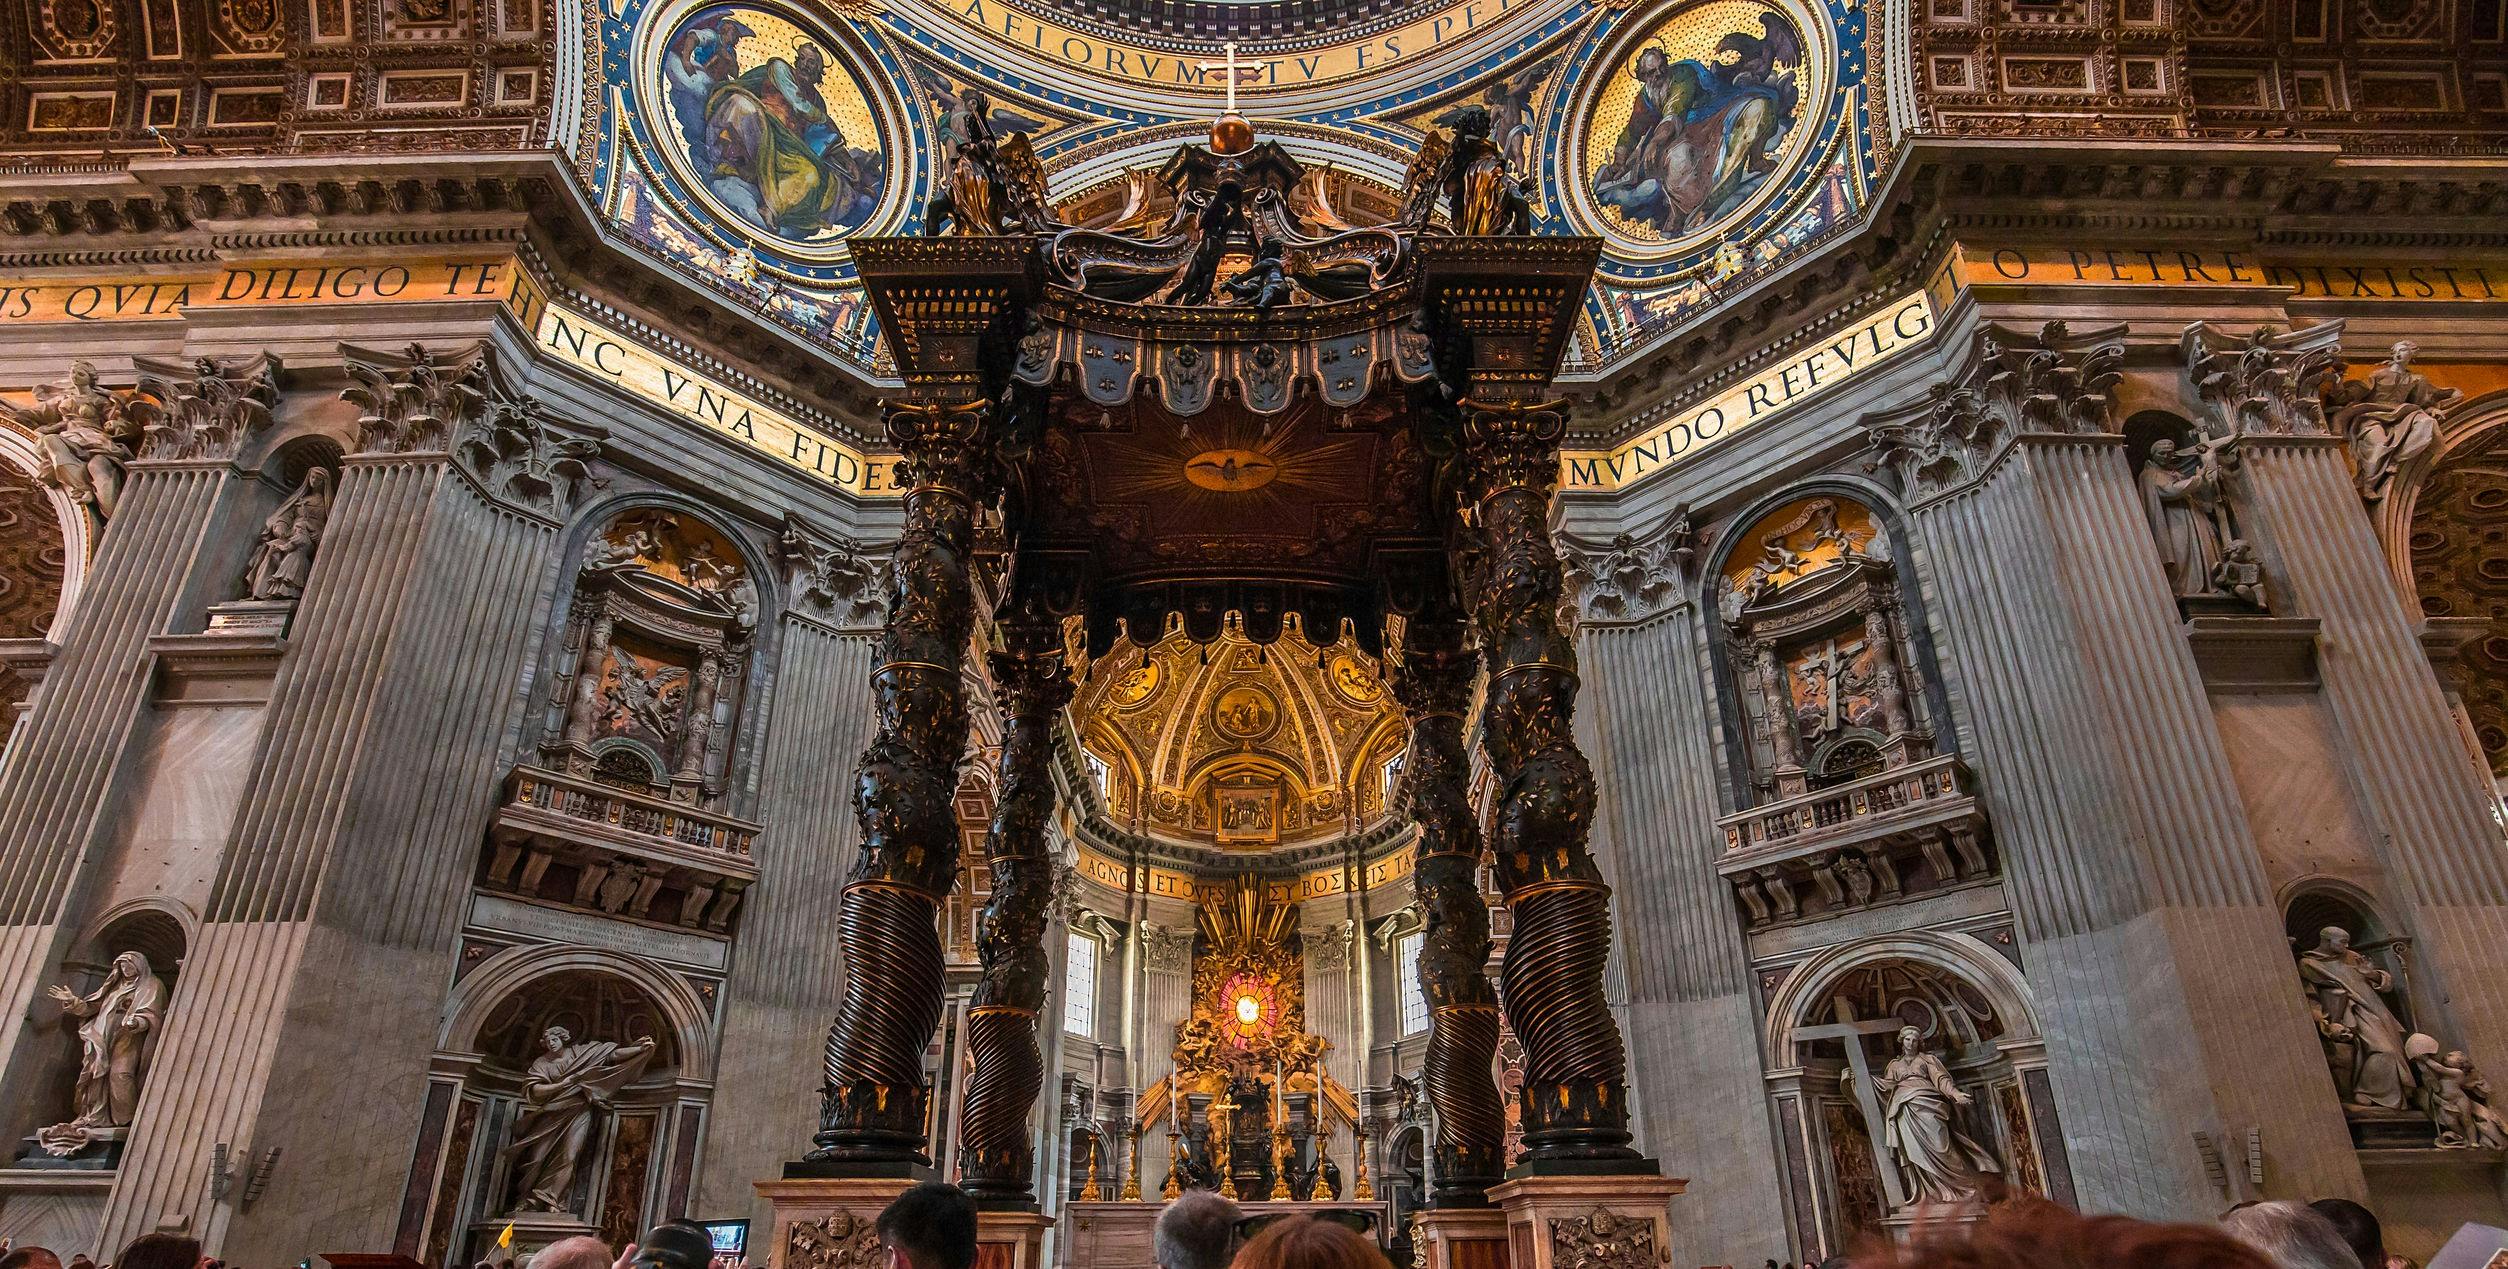 Virtual tour of St. Peter's Basilica from home